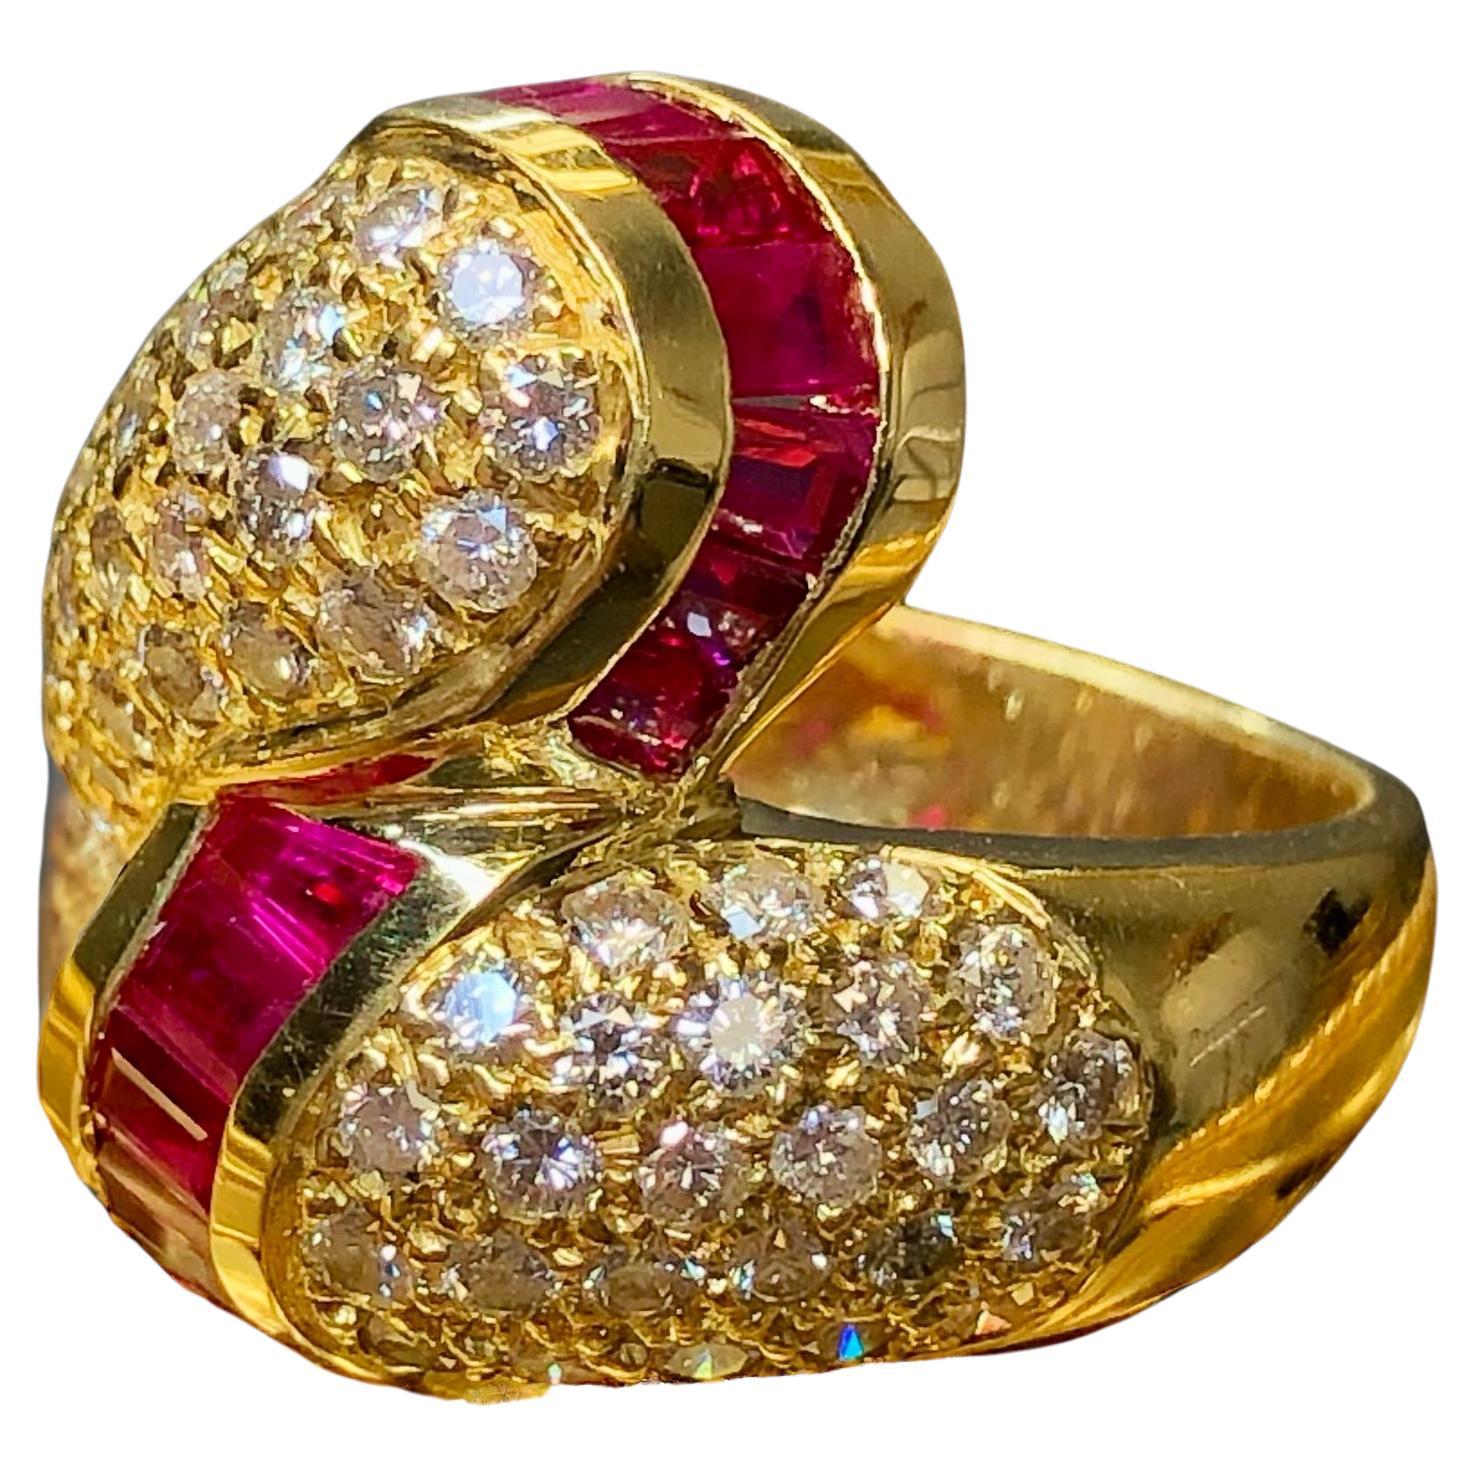 Vintage 18K Ruby Pave Diamond Bypass Large Cocktail Ring 4.53cttw Sz 7.75 For Sale